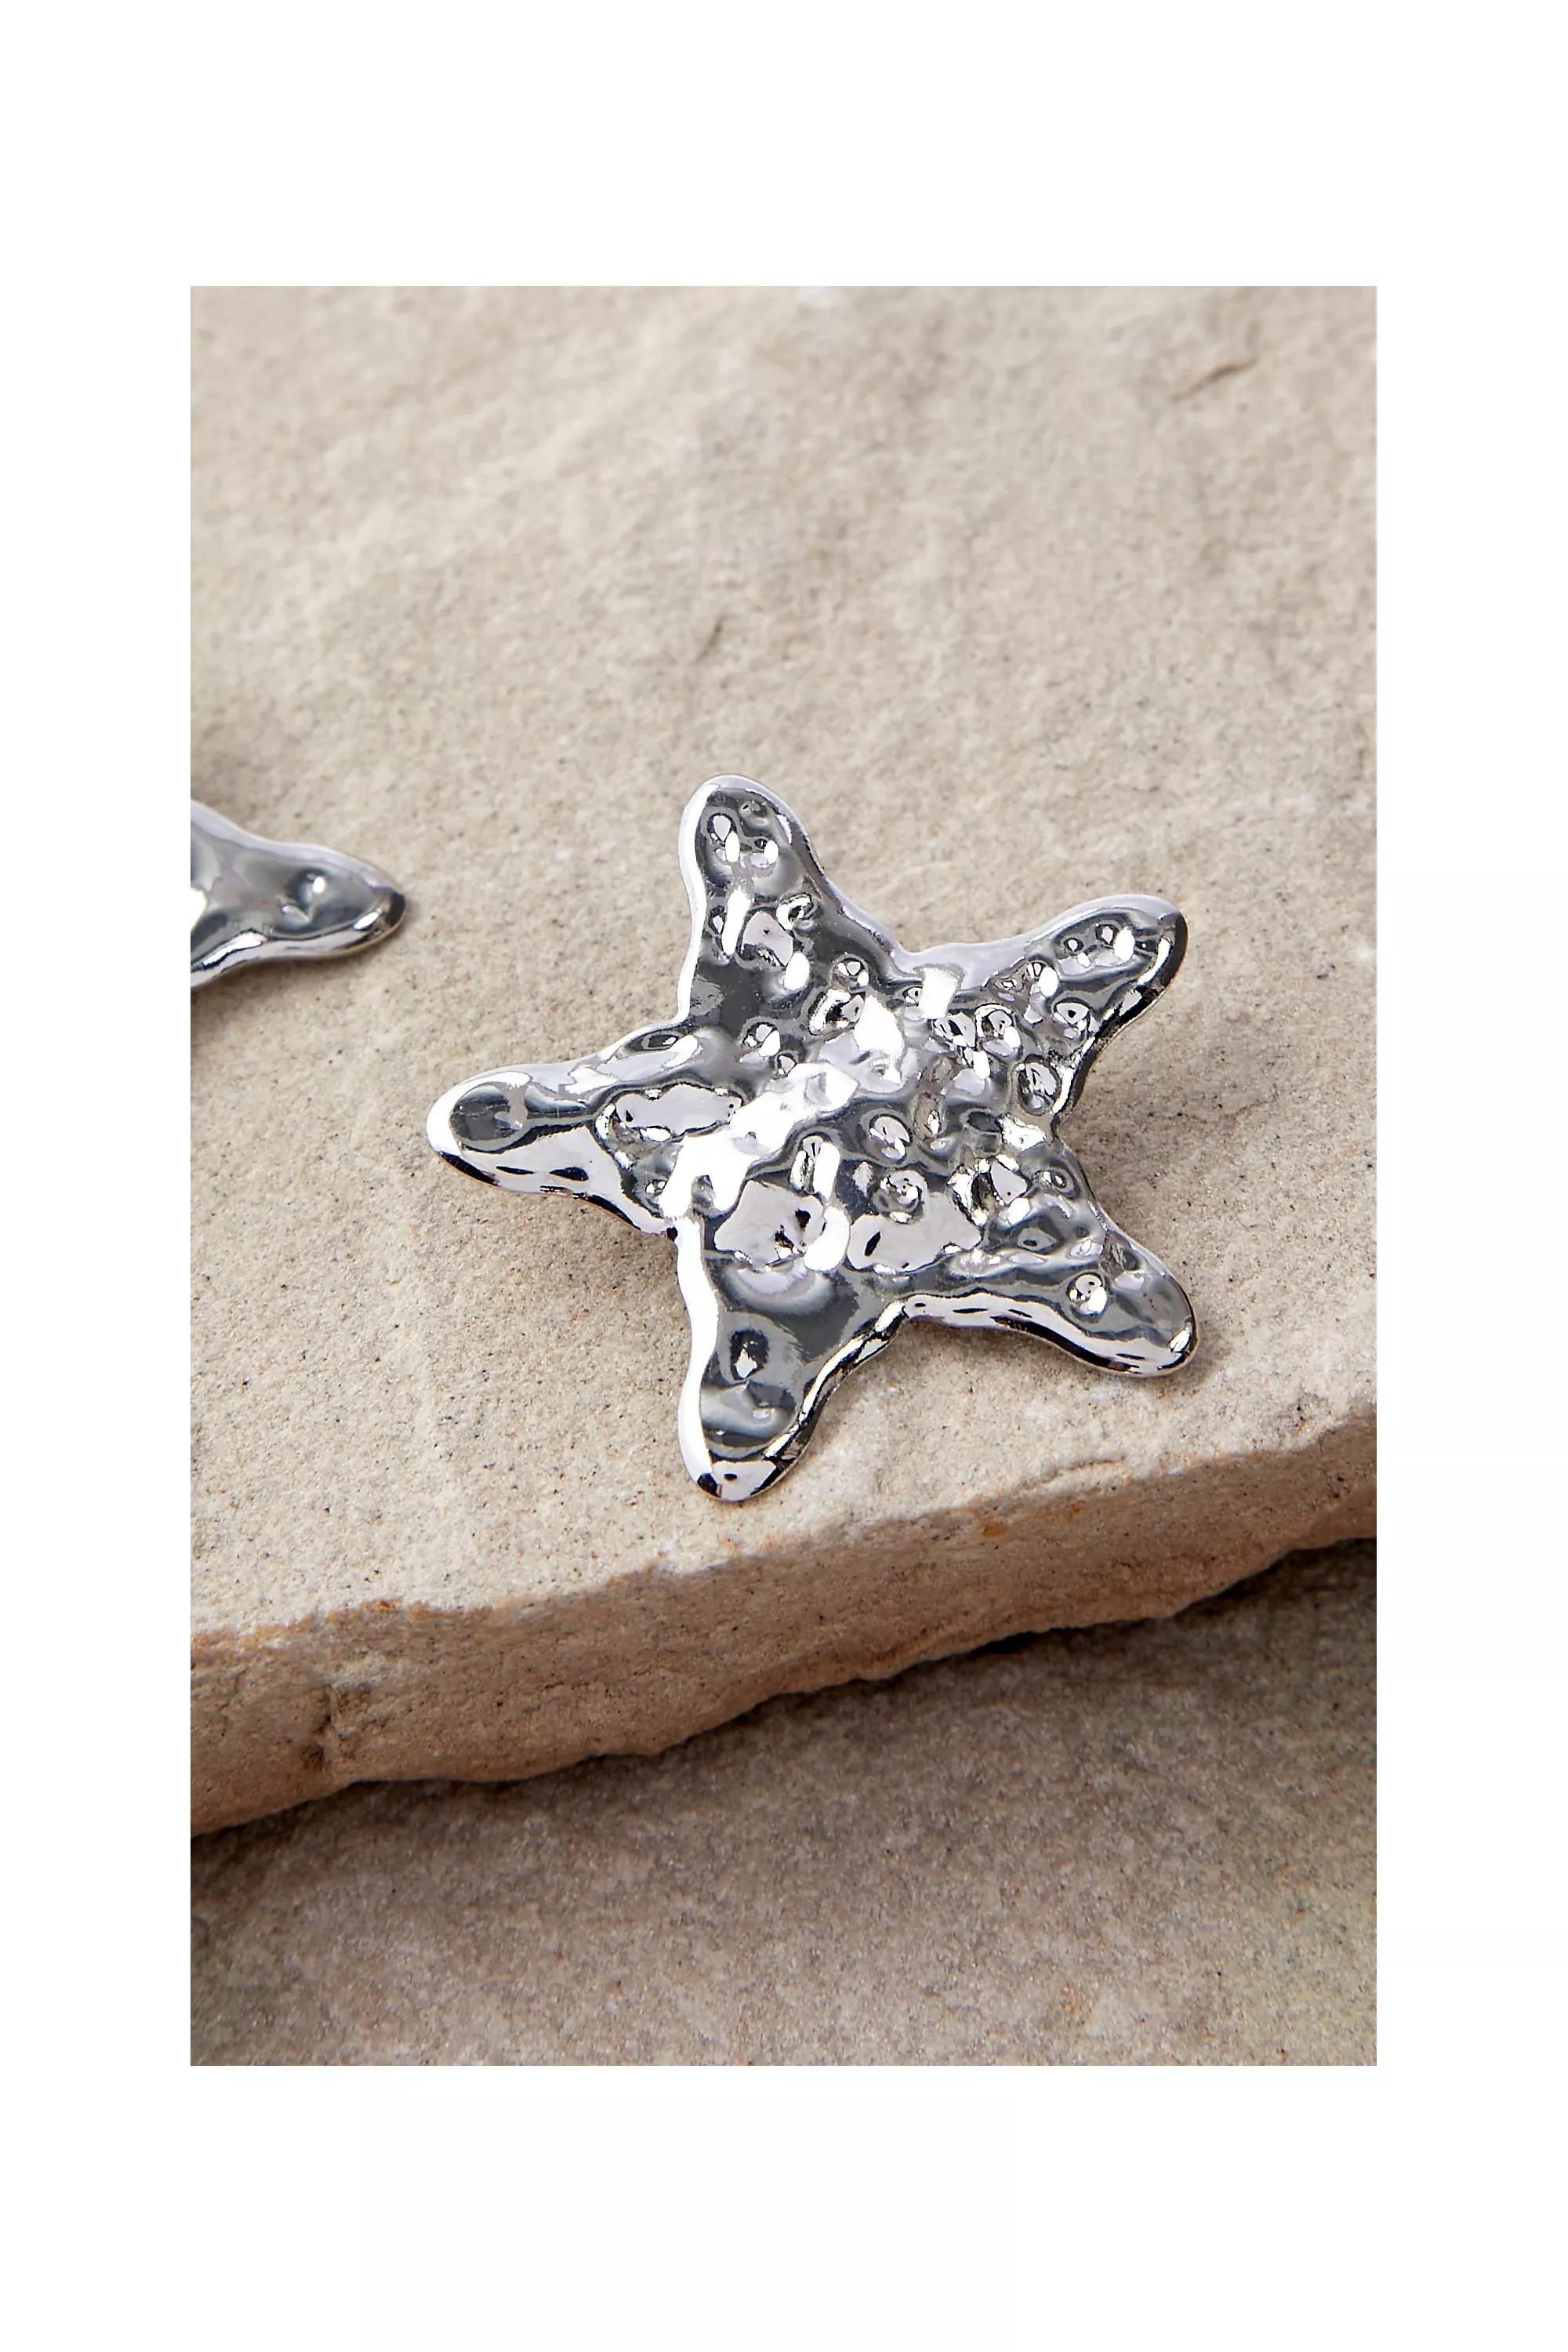 Urban Outfitters - Silver Star Hair Clips, Set Of 2